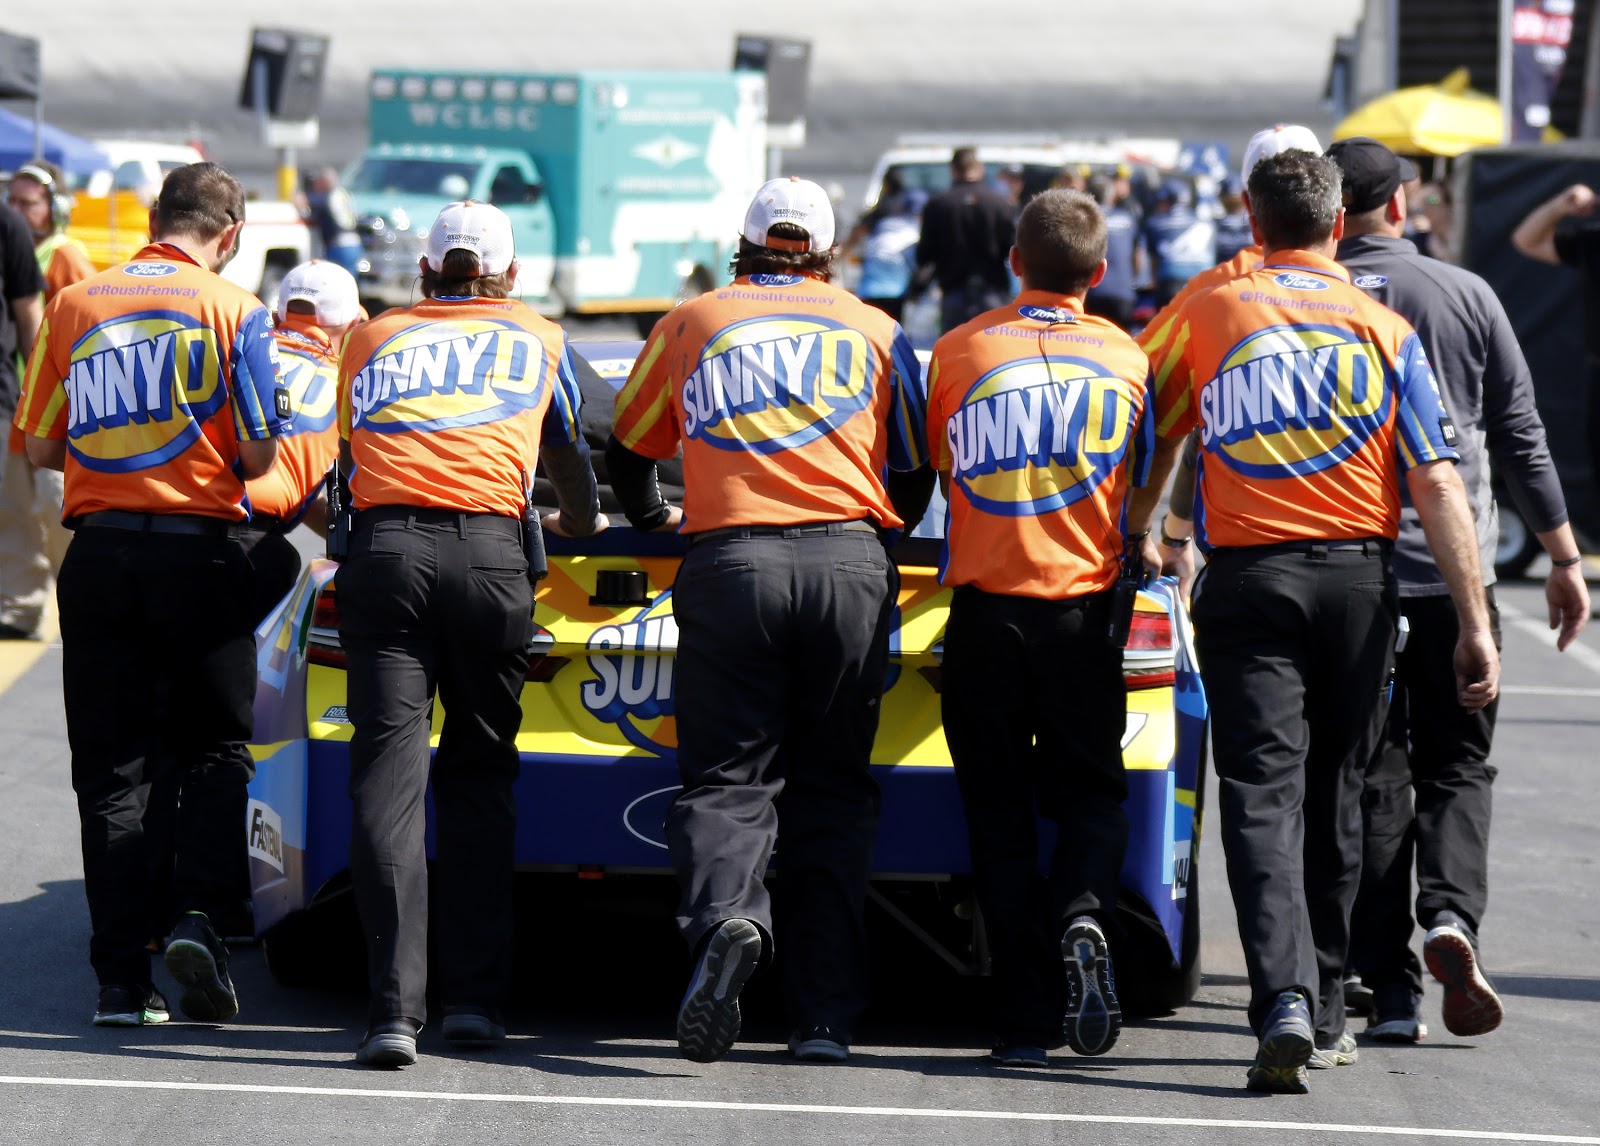 Sunny Delight rebranded as SunnyD in 2003, and now sponsors a NASCAR team in addition to their line of vodka seltzers. (Jeff Robinson/Icon Sportswire via Getty Images)